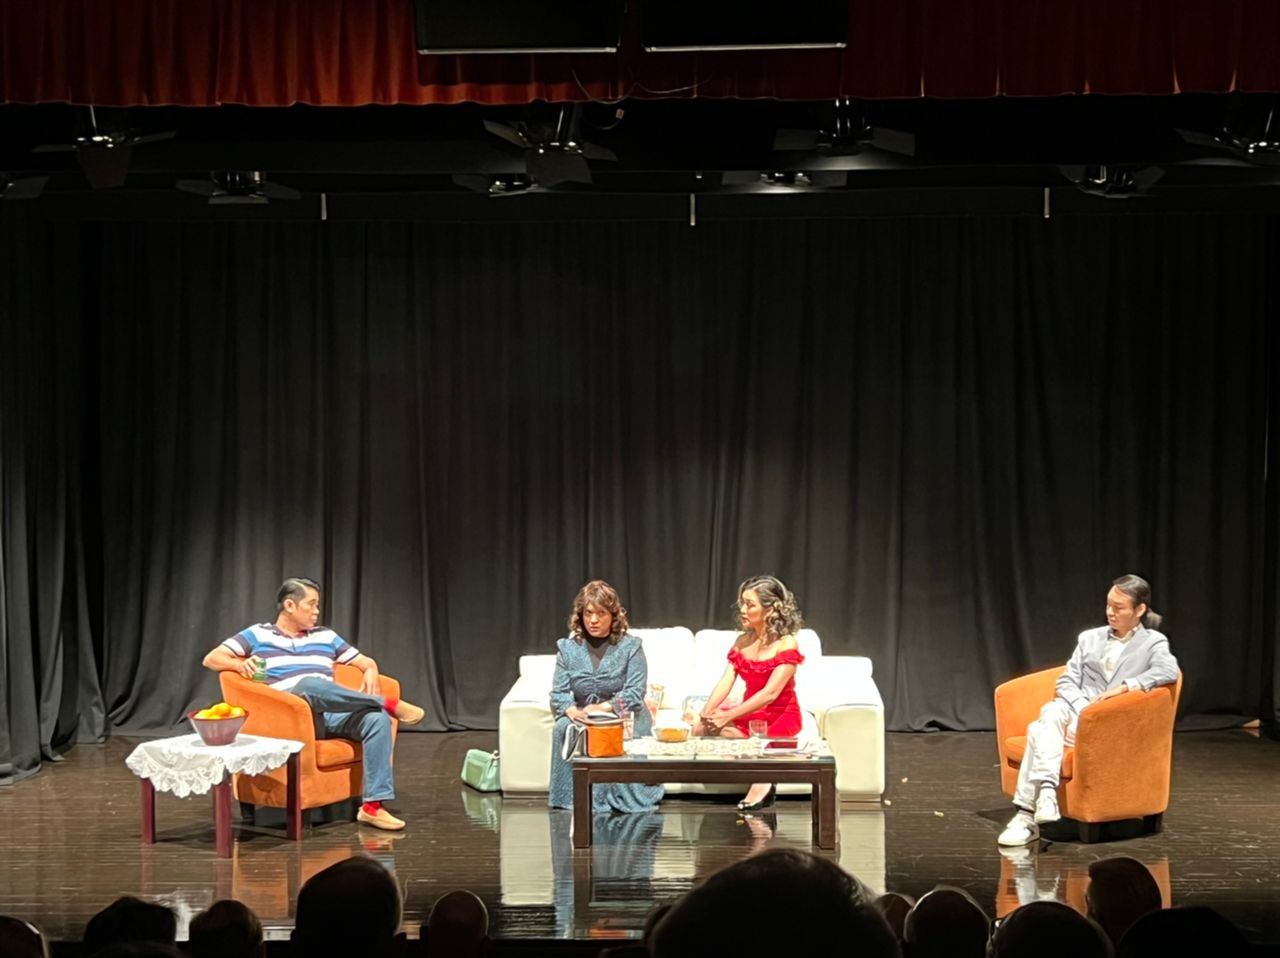 The Penang Players Music and Drama Society performing their adult comedy stage play A Couple of Secrets at Wawasan Open University. – IAN MCINTYRE/The Vibes pic, May 15, 2022